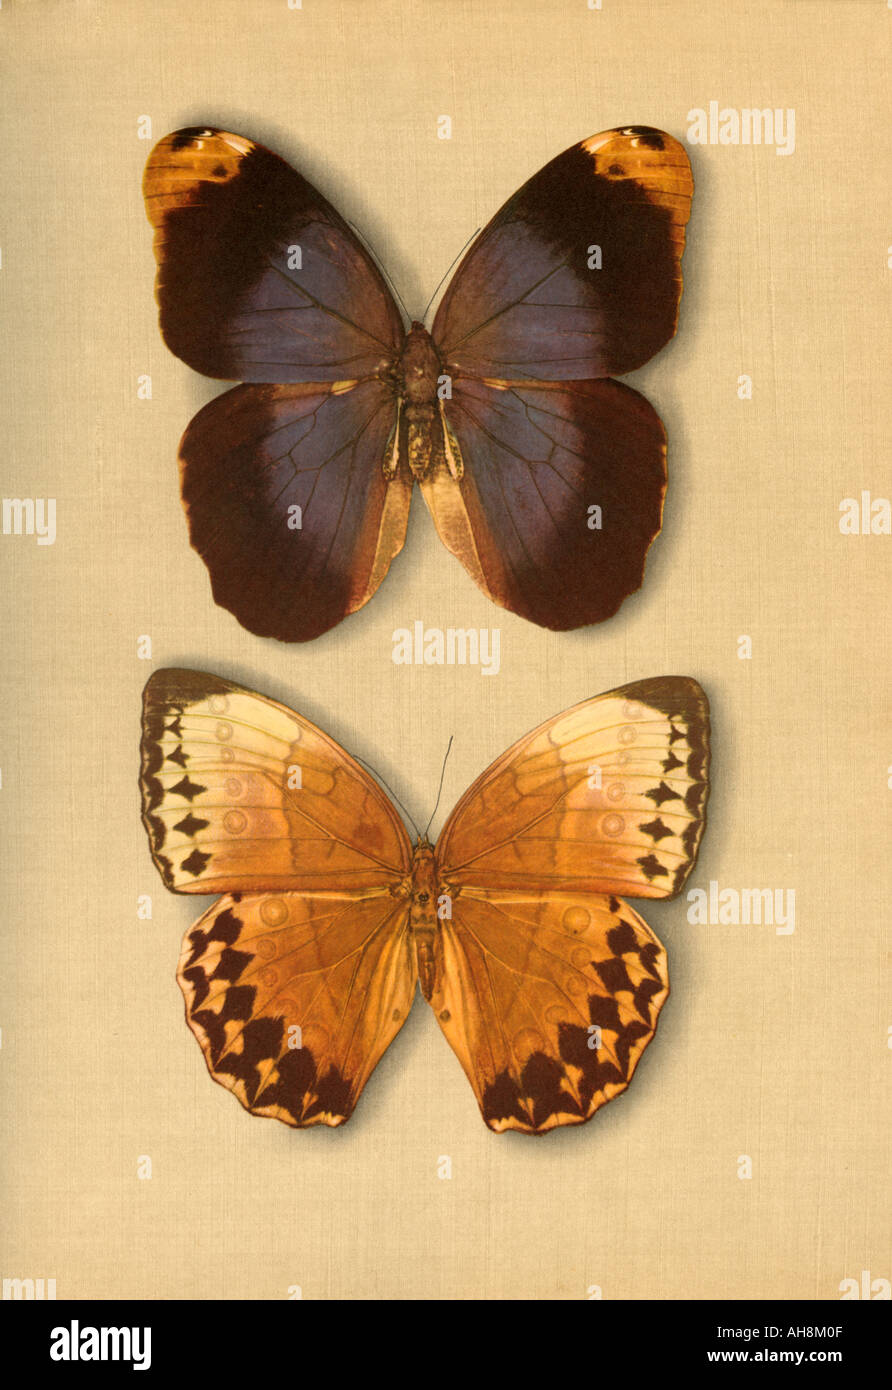 Two artistic colorful mounted butterflies moths Stock Photo